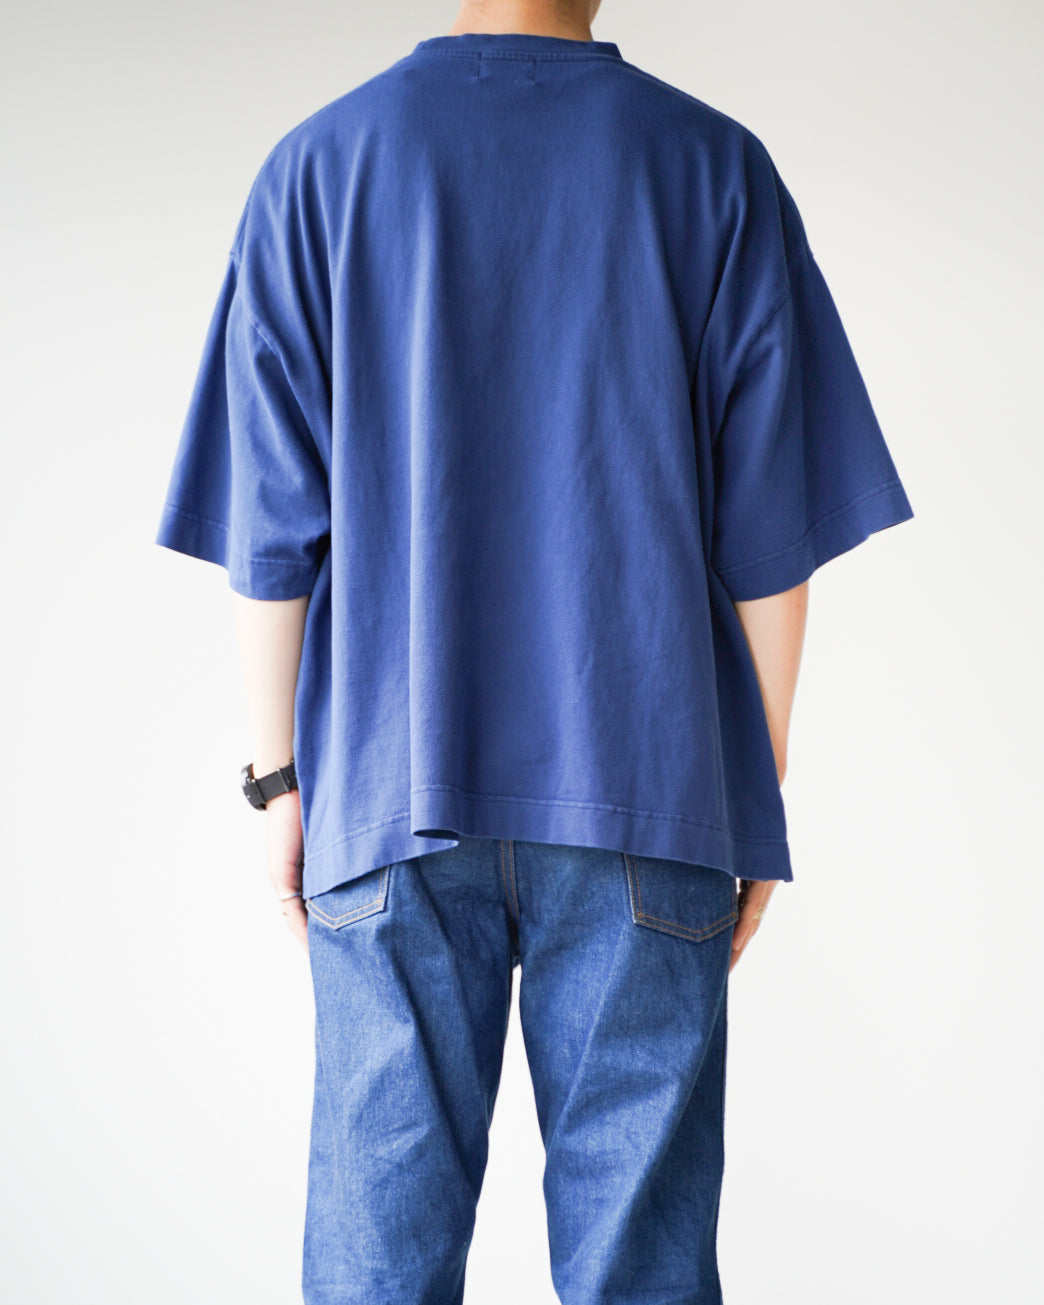 【EVCON】PIGMENT WIDE S/S T-SHIRTS - NAVY